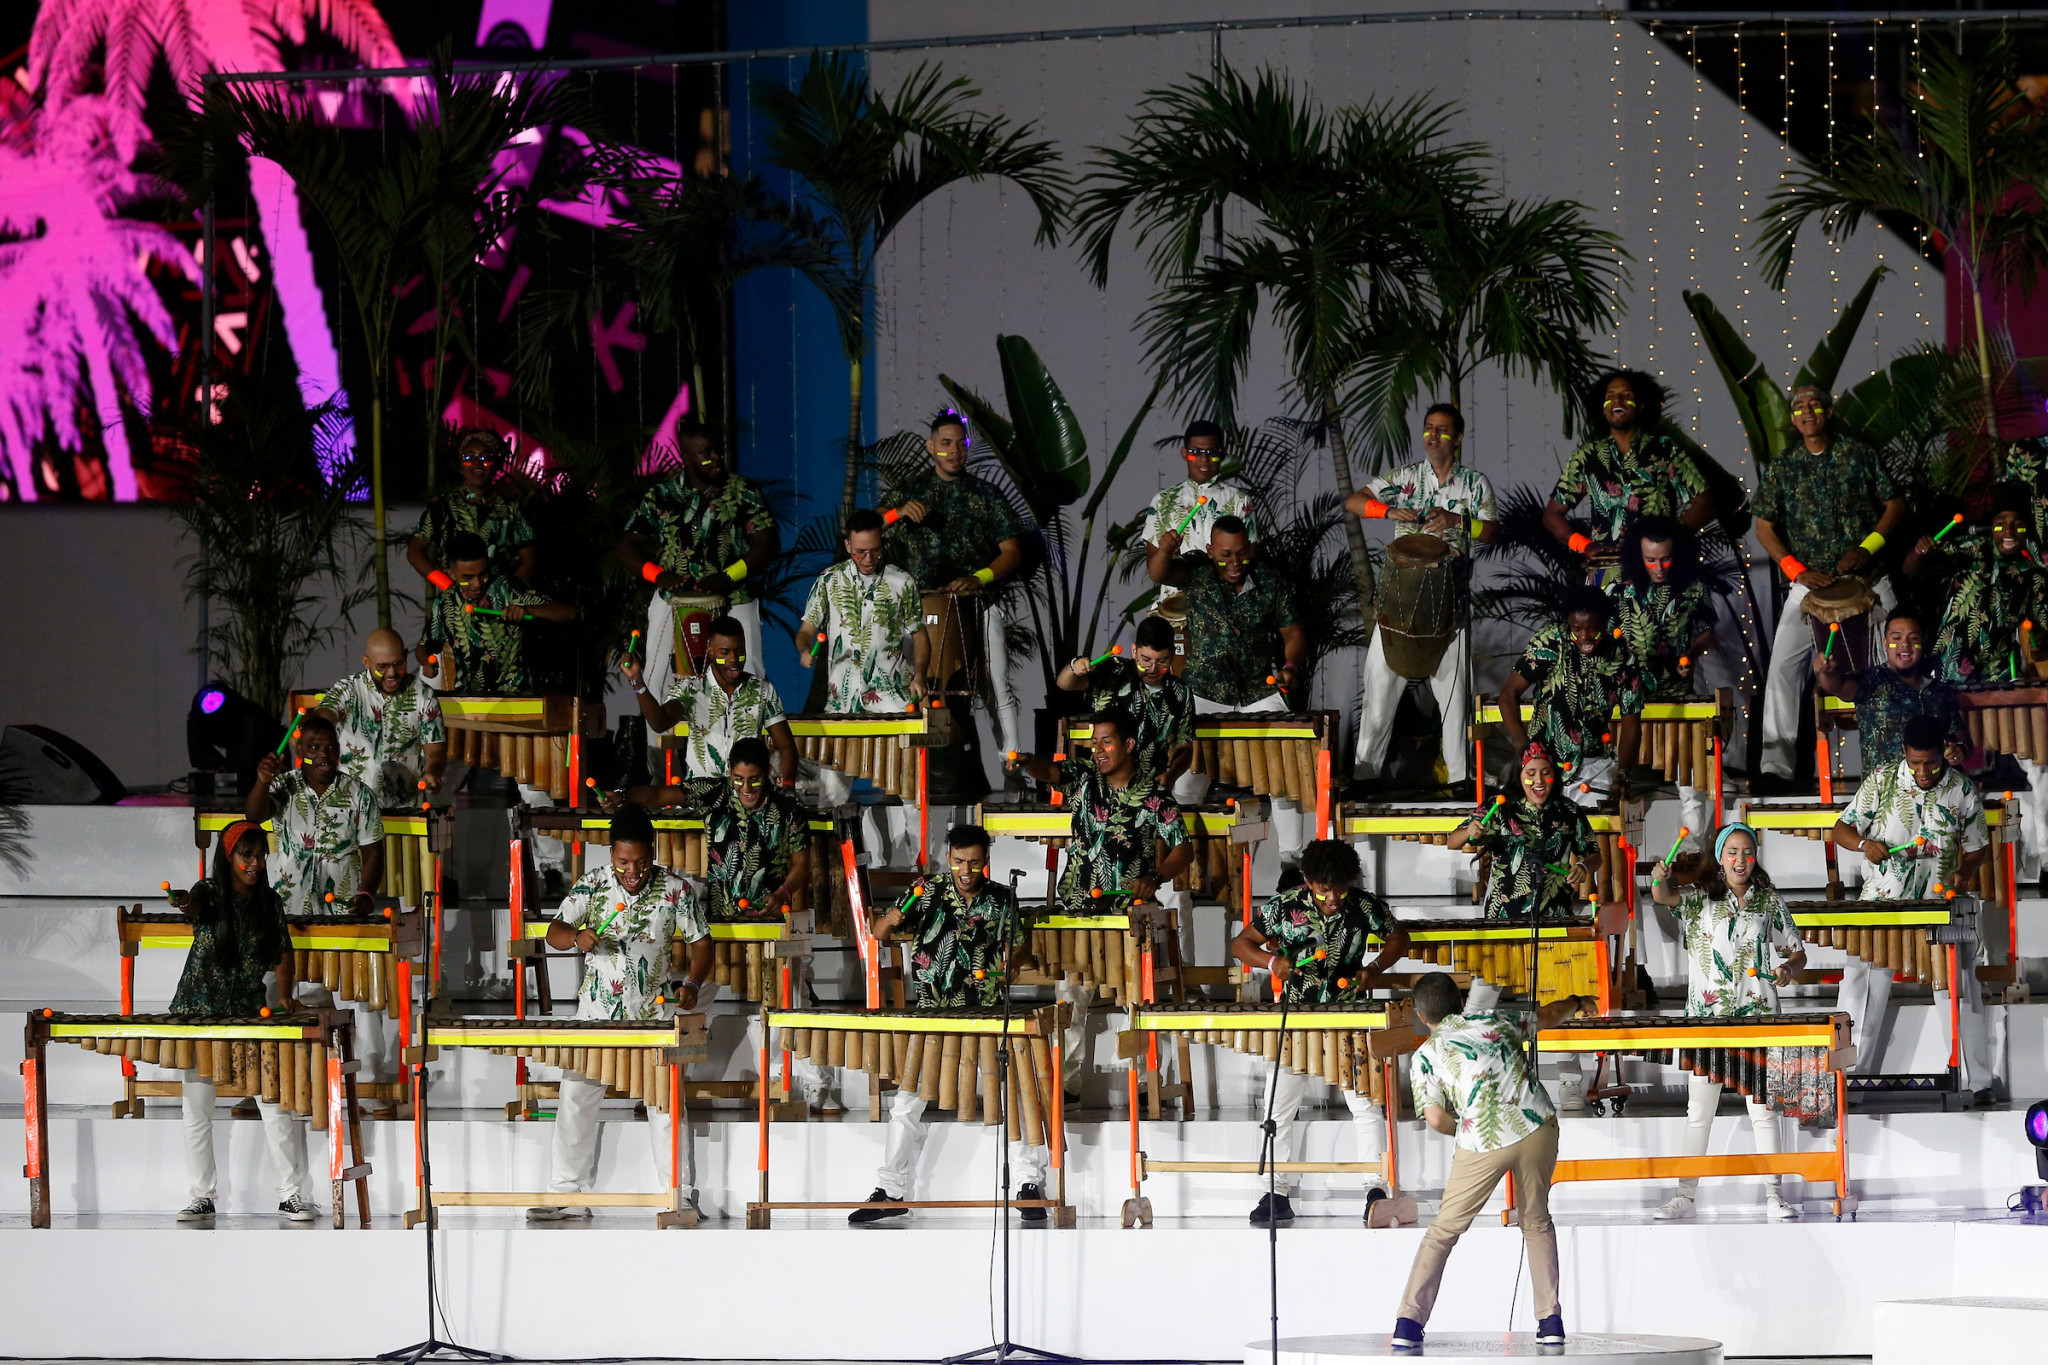 An orchestra of percussionists accompanied dancers at the Opening Ceremony ©Agencia.XpressMedia